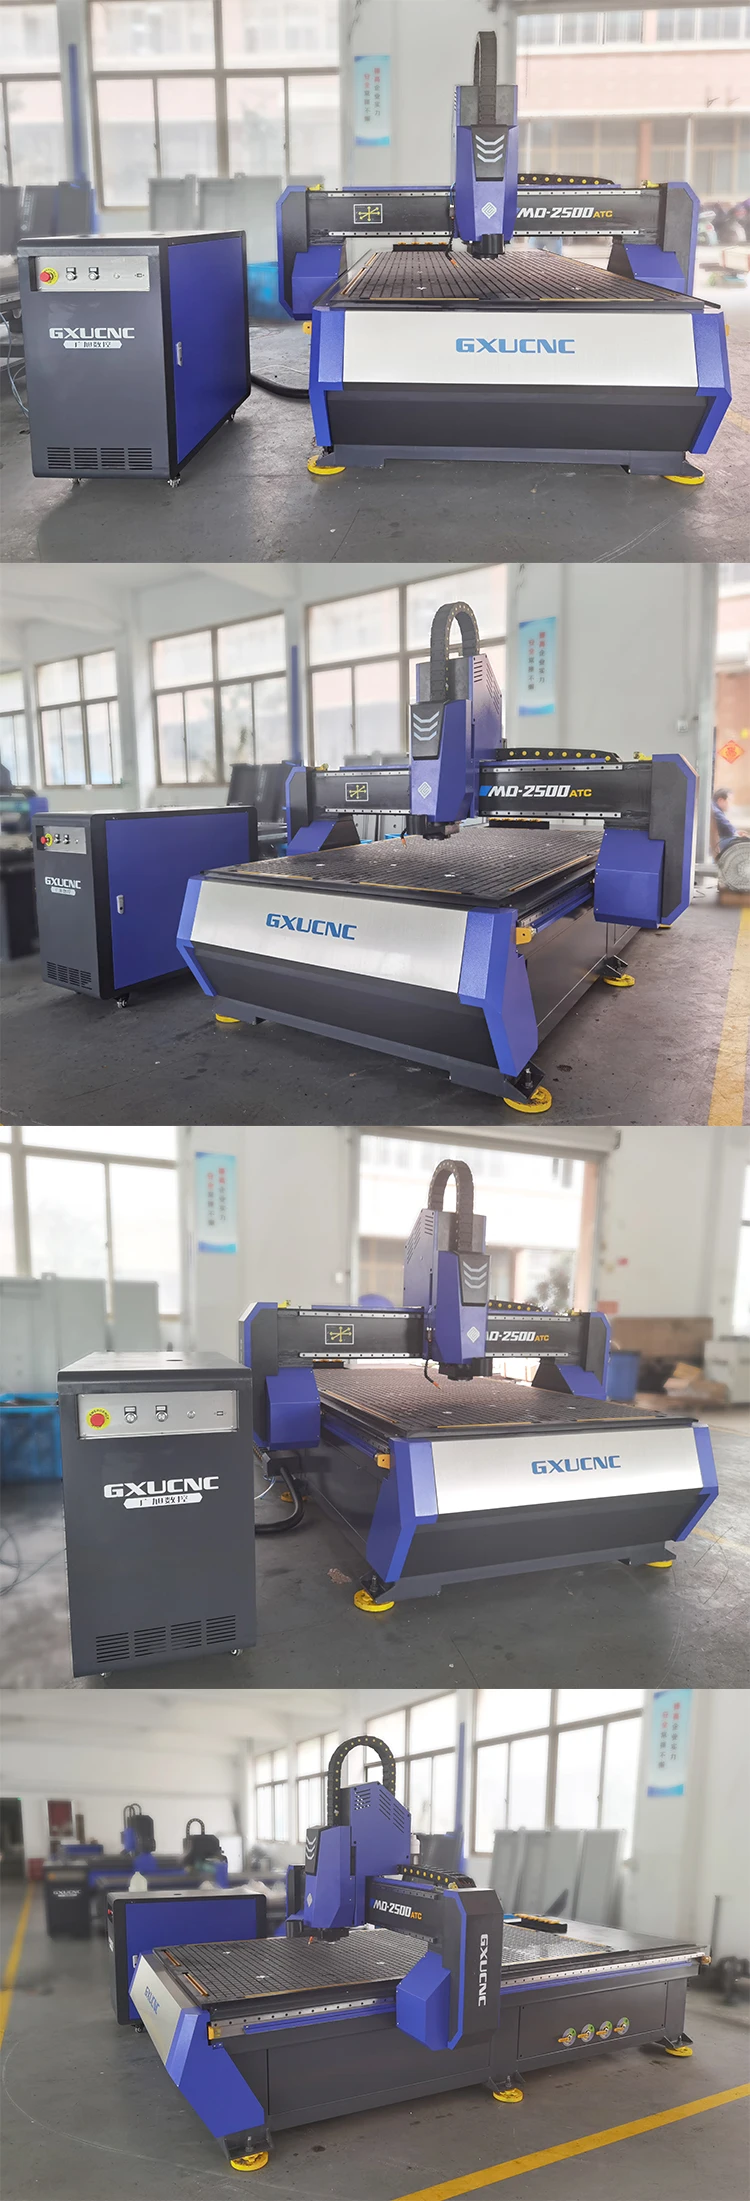 Acrylic Aluminum Cutting Cnc Router Engraving Machine Woodworking Router6090/1530 For Pvc Leather